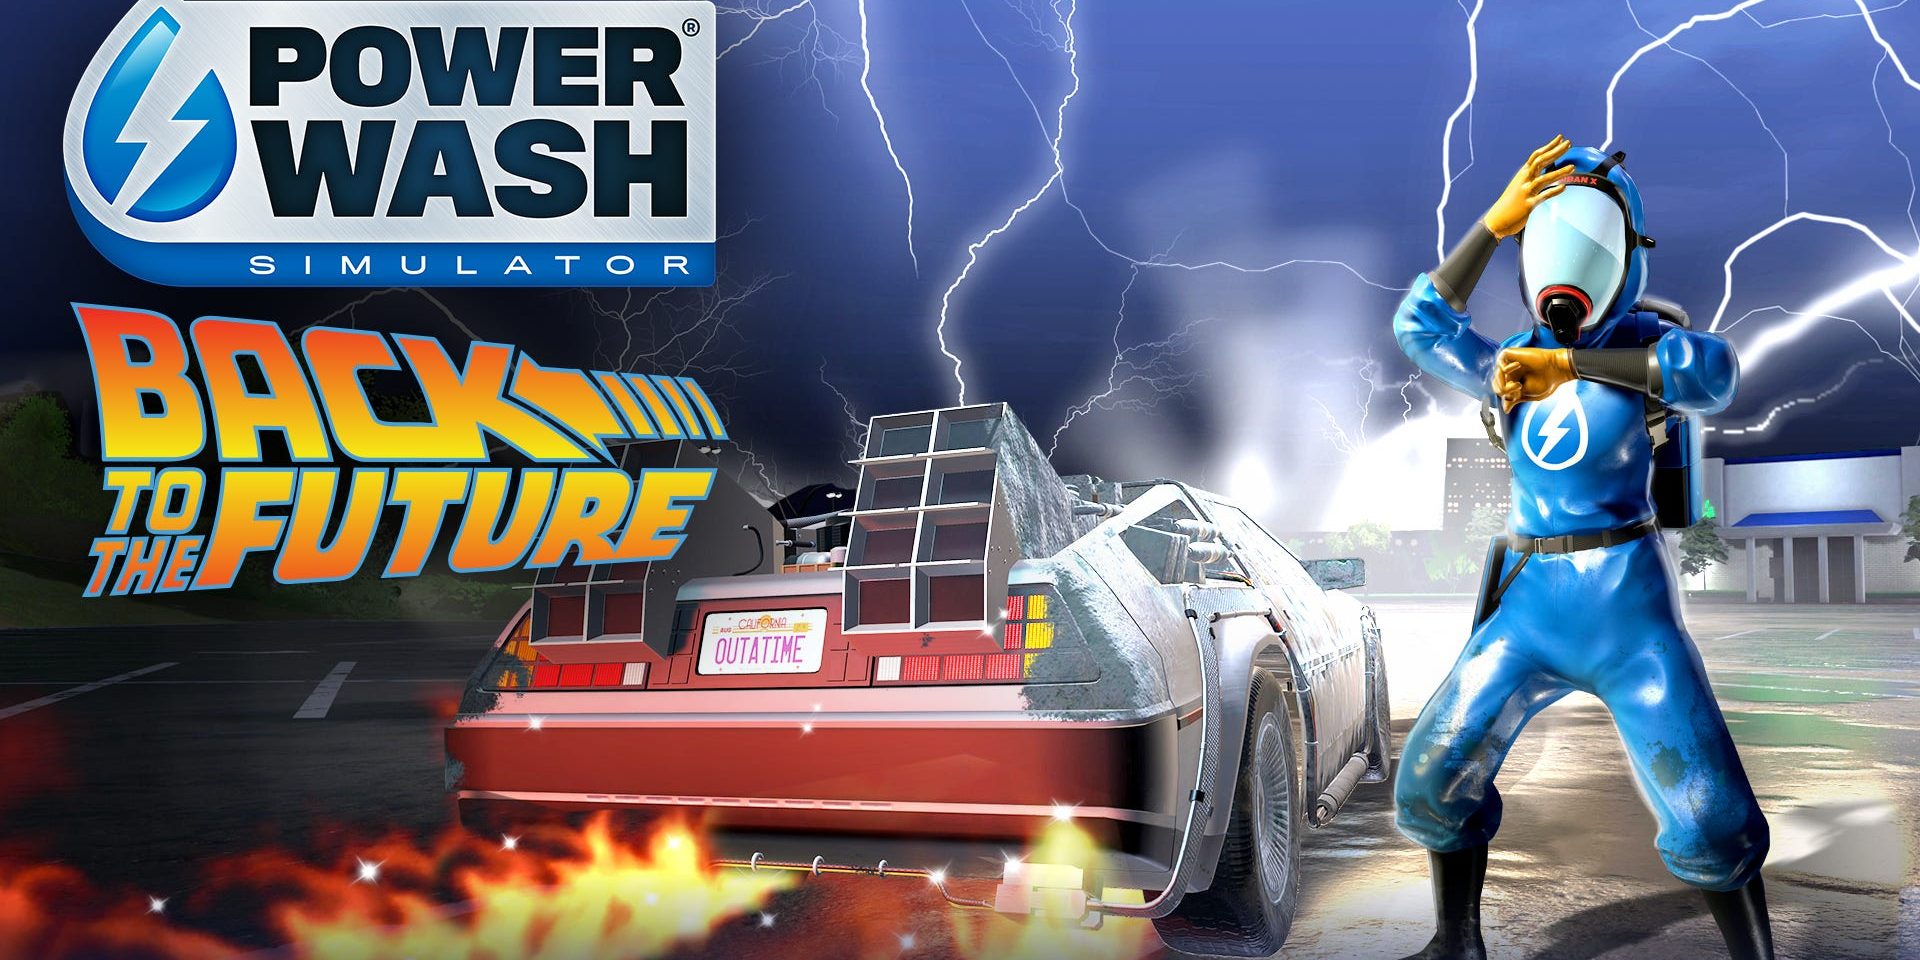 Great Scott! There's a Back to the Future DLC coming to PowerWash Simulator